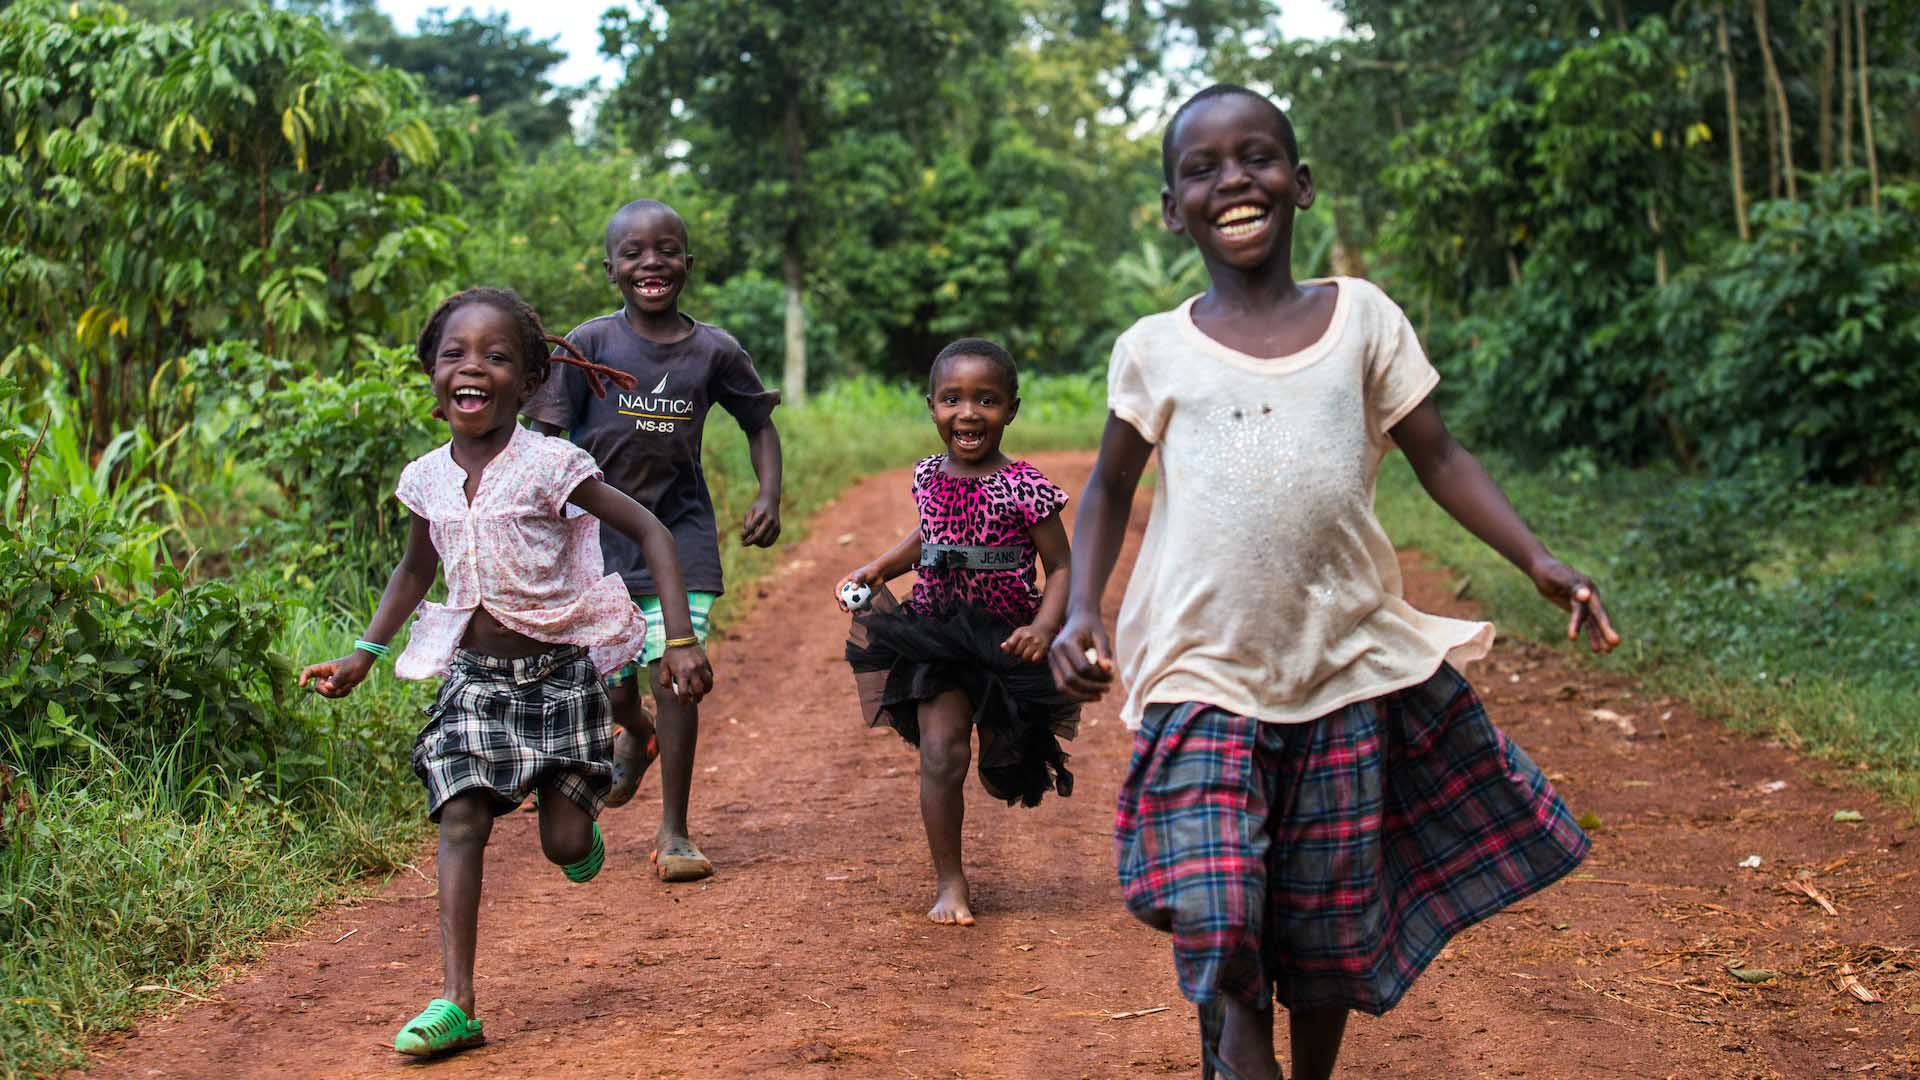 Four young African children run along a road smiling happily. Shutterstock